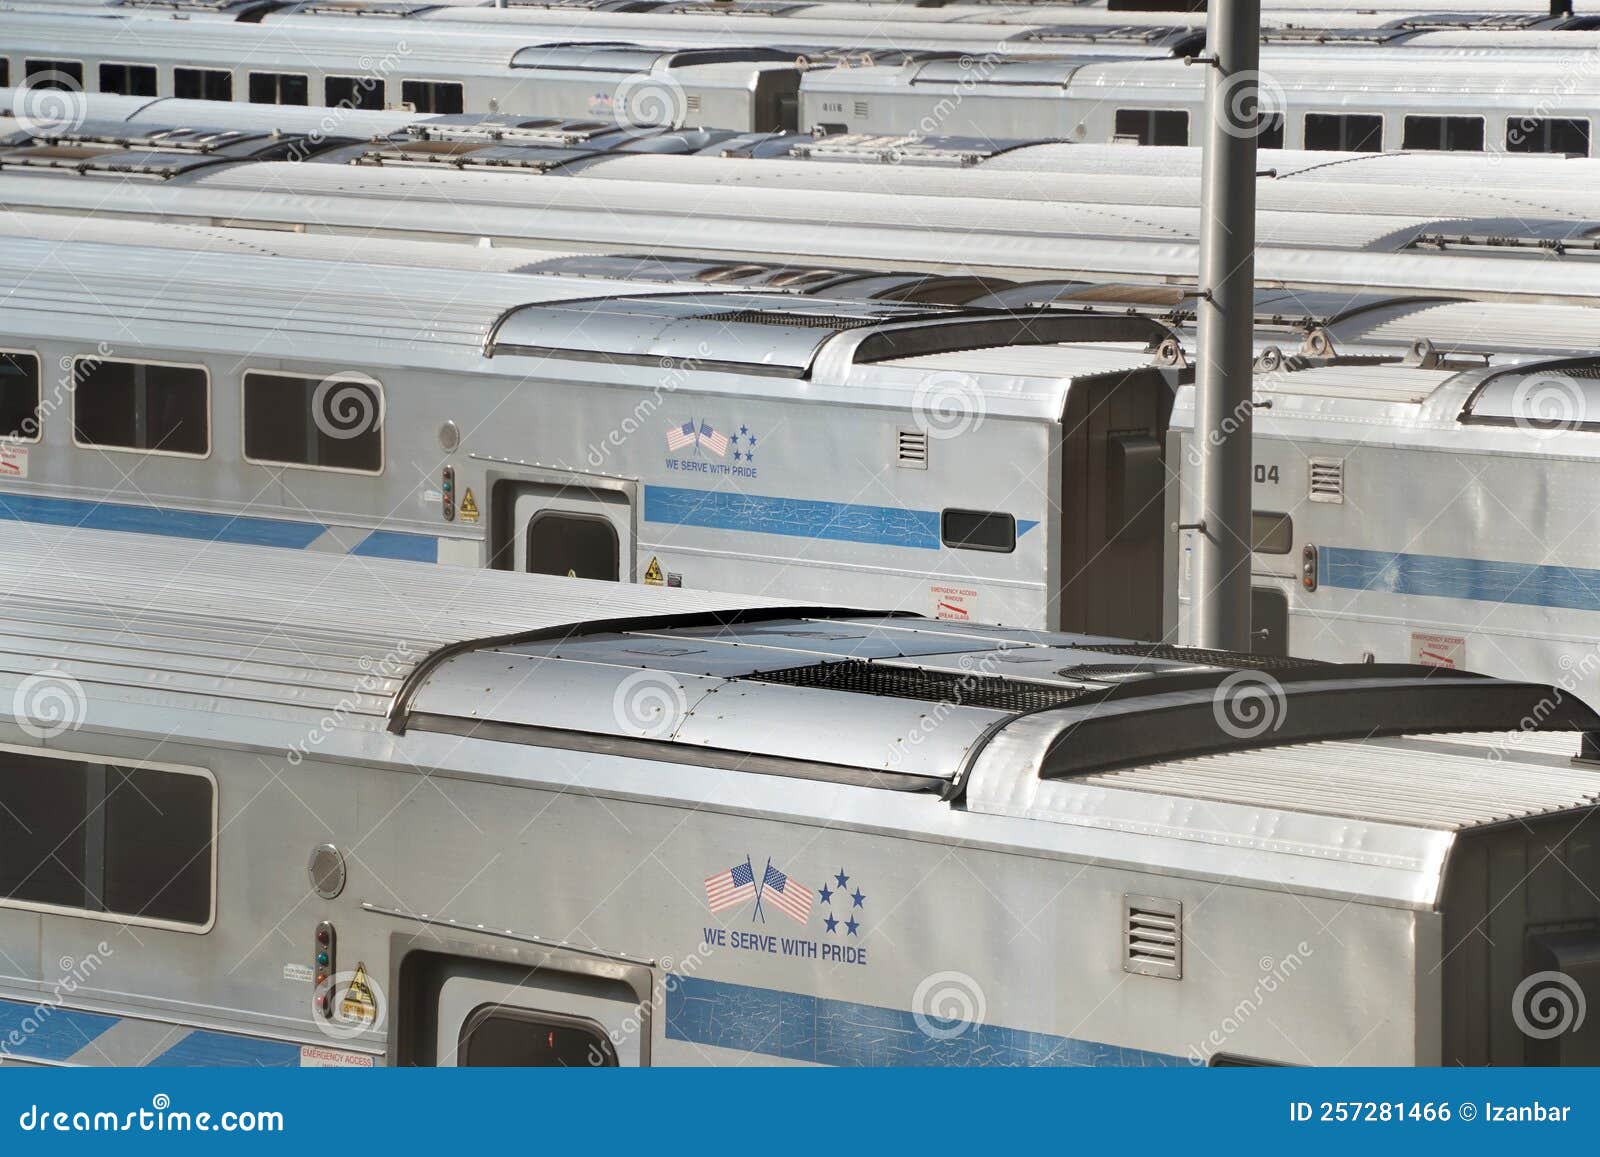 Many Trains in New York City Usa Editorial Photo - Image of cargo ...